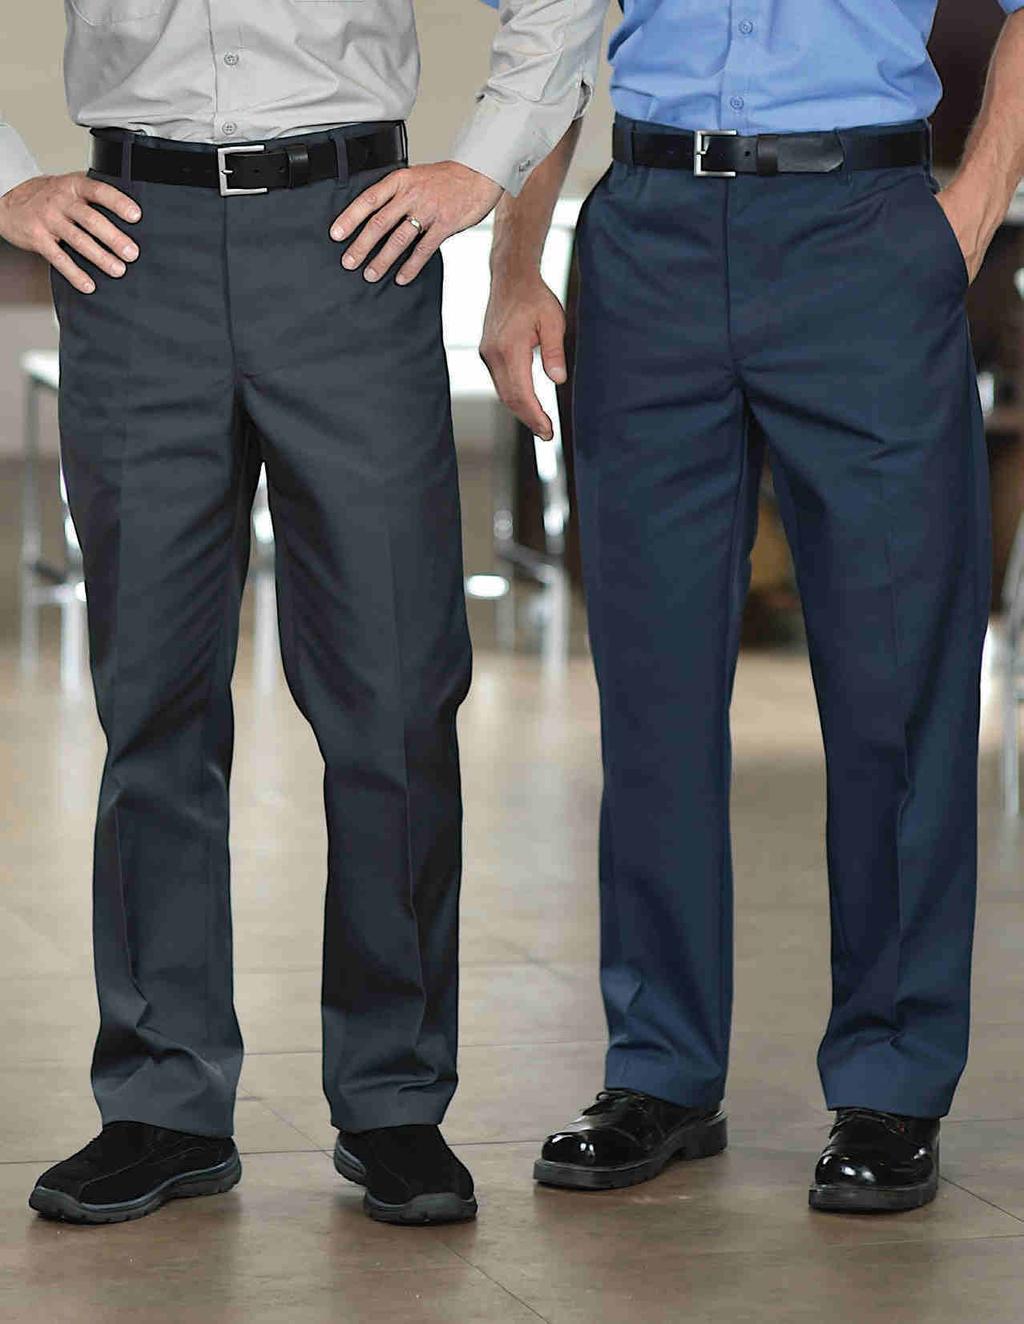 WORK PANTS Ideally suited to match our line of high quality work shirts, these work pants are durable, comfortable and well-made to provide